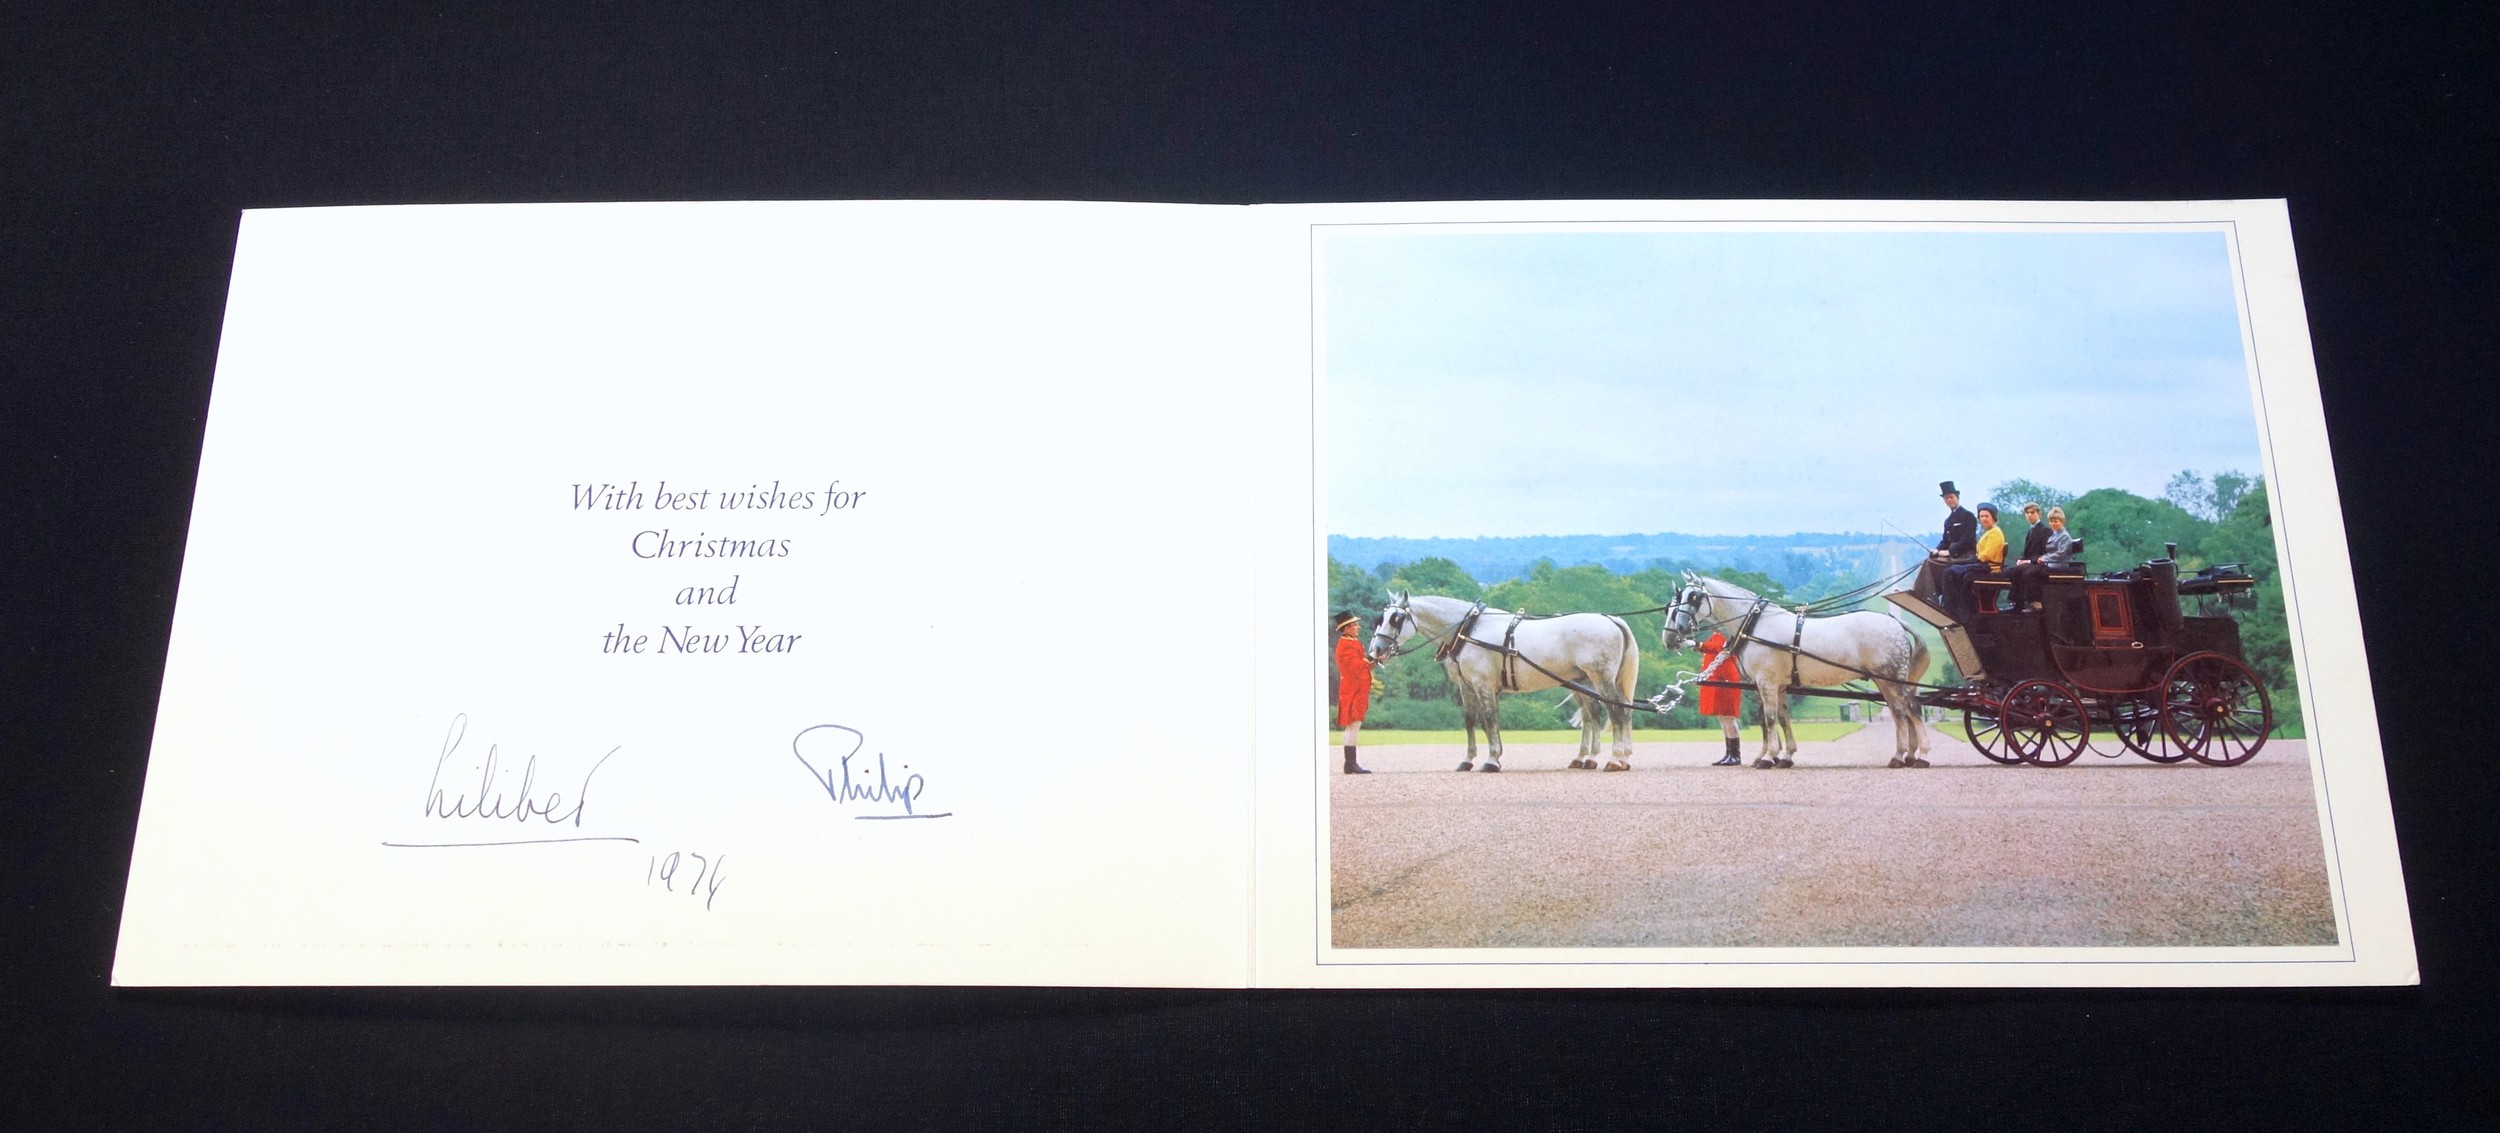 H.M. Queen Elizabeth II ('Lilibet' signed) and H.R.H. The Duke of Edinburgh, Christmas cards dated